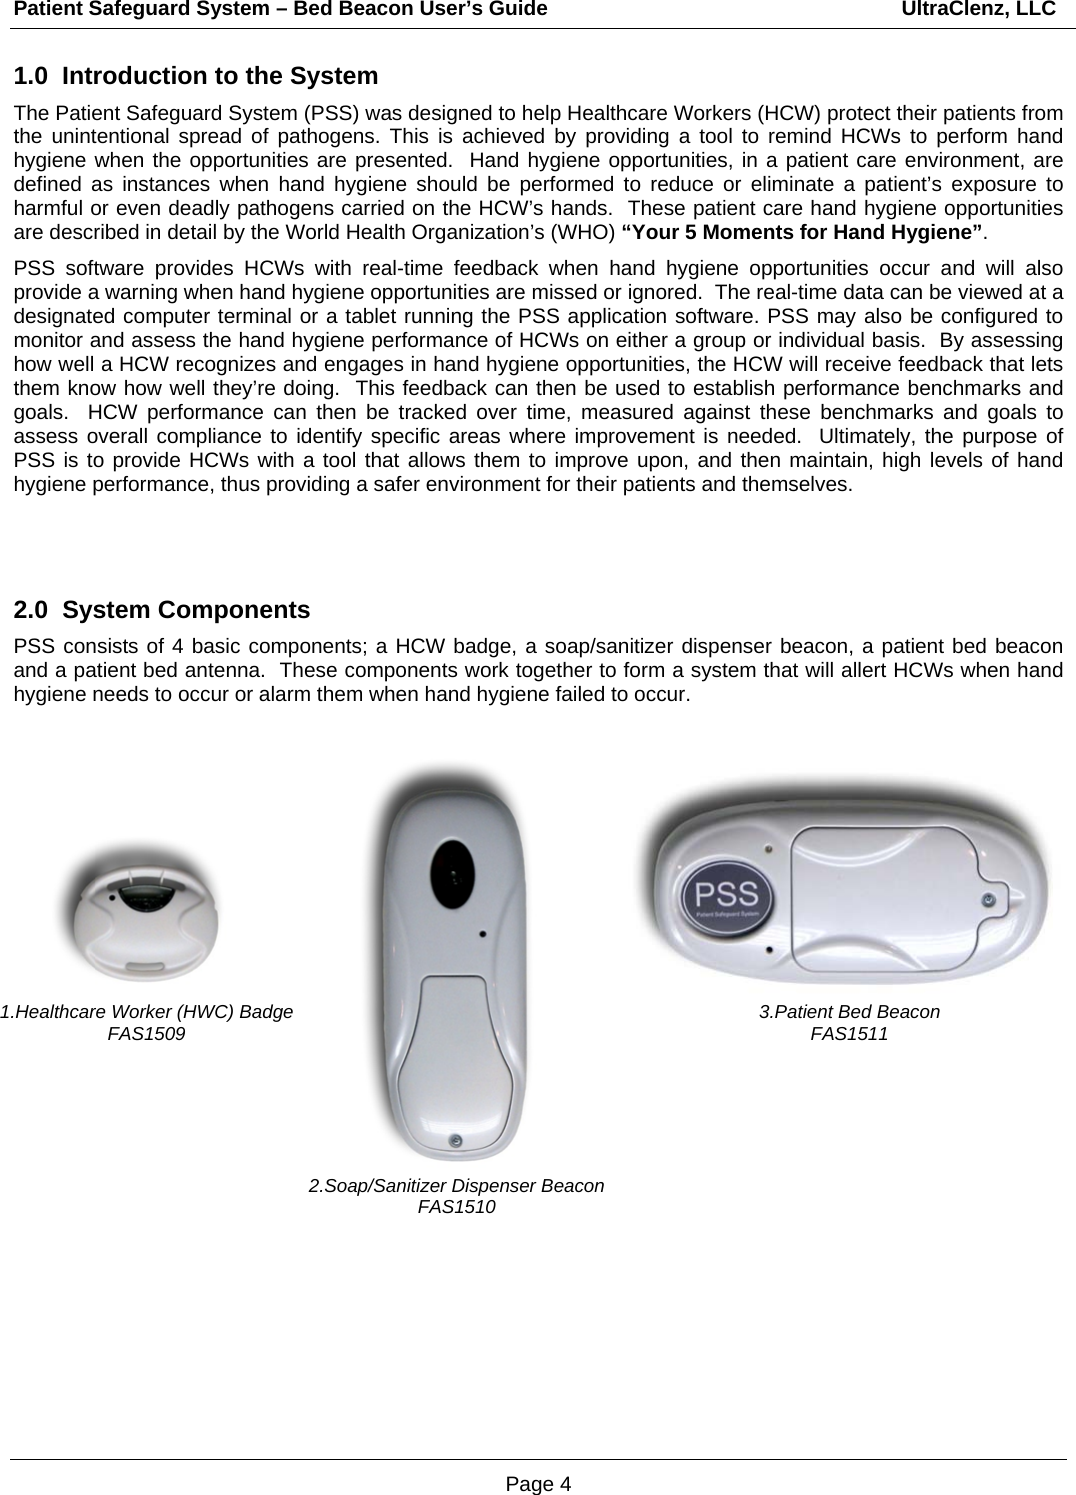 Patient Safeguard System – Bed Beacon User’s Guide                                                             UltraClenz, LLC Page 4 1.Healthcare Worker (HWC) Badge FAS1509 1.0  Introduction to the System The Patient Safeguard System (PSS) was designed to help Healthcare Workers (HCW) protect their patients from the unintentional spread of pathogens. This is achieved by providing a tool to remind HCWs to perform hand hygiene when the opportunities are presented.  Hand hygiene opportunities, in a patient care environment, are defined as instances when hand hygiene should be performed to reduce or eliminate a patient’s exposure to harmful or even deadly pathogens carried on the HCW’s hands.  These patient care hand hygiene opportunities are described in detail by the World Health Organization’s (WHO) “Your 5 Moments for Hand Hygiene”.   PSS software provides HCWs with real-time feedback when hand hygiene opportunities occur and will also provide a warning when hand hygiene opportunities are missed or ignored.  The real-time data can be viewed at a designated computer terminal or a tablet running the PSS application software. PSS may also be configured to monitor and assess the hand hygiene performance of HCWs on either a group or individual basis.  By assessing how well a HCW recognizes and engages in hand hygiene opportunities, the HCW will receive feedback that lets them know how well they’re doing.  This feedback can then be used to establish performance benchmarks and goals.  HCW performance can then be tracked over time, measured against these benchmarks and goals to assess overall compliance to identify specific areas where improvement is needed.  Ultimately, the purpose of PSS is to provide HCWs with a tool that allows them to improve upon, and then maintain, high levels of hand hygiene performance, thus providing a safer environment for their patients and themselves.   2.0  System Components  PSS consists of 4 basic components; a HCW badge, a soap/sanitizer dispenser beacon, a patient bed beacon and a patient bed antenna.  These components work together to form a system that will allert HCWs when hand hygiene needs to occur or alarm them when hand hygiene failed to occur.                        3.Patient Bed Beacon FAS1511 2.Soap/Sanitizer Dispenser Beacon FAS1510 